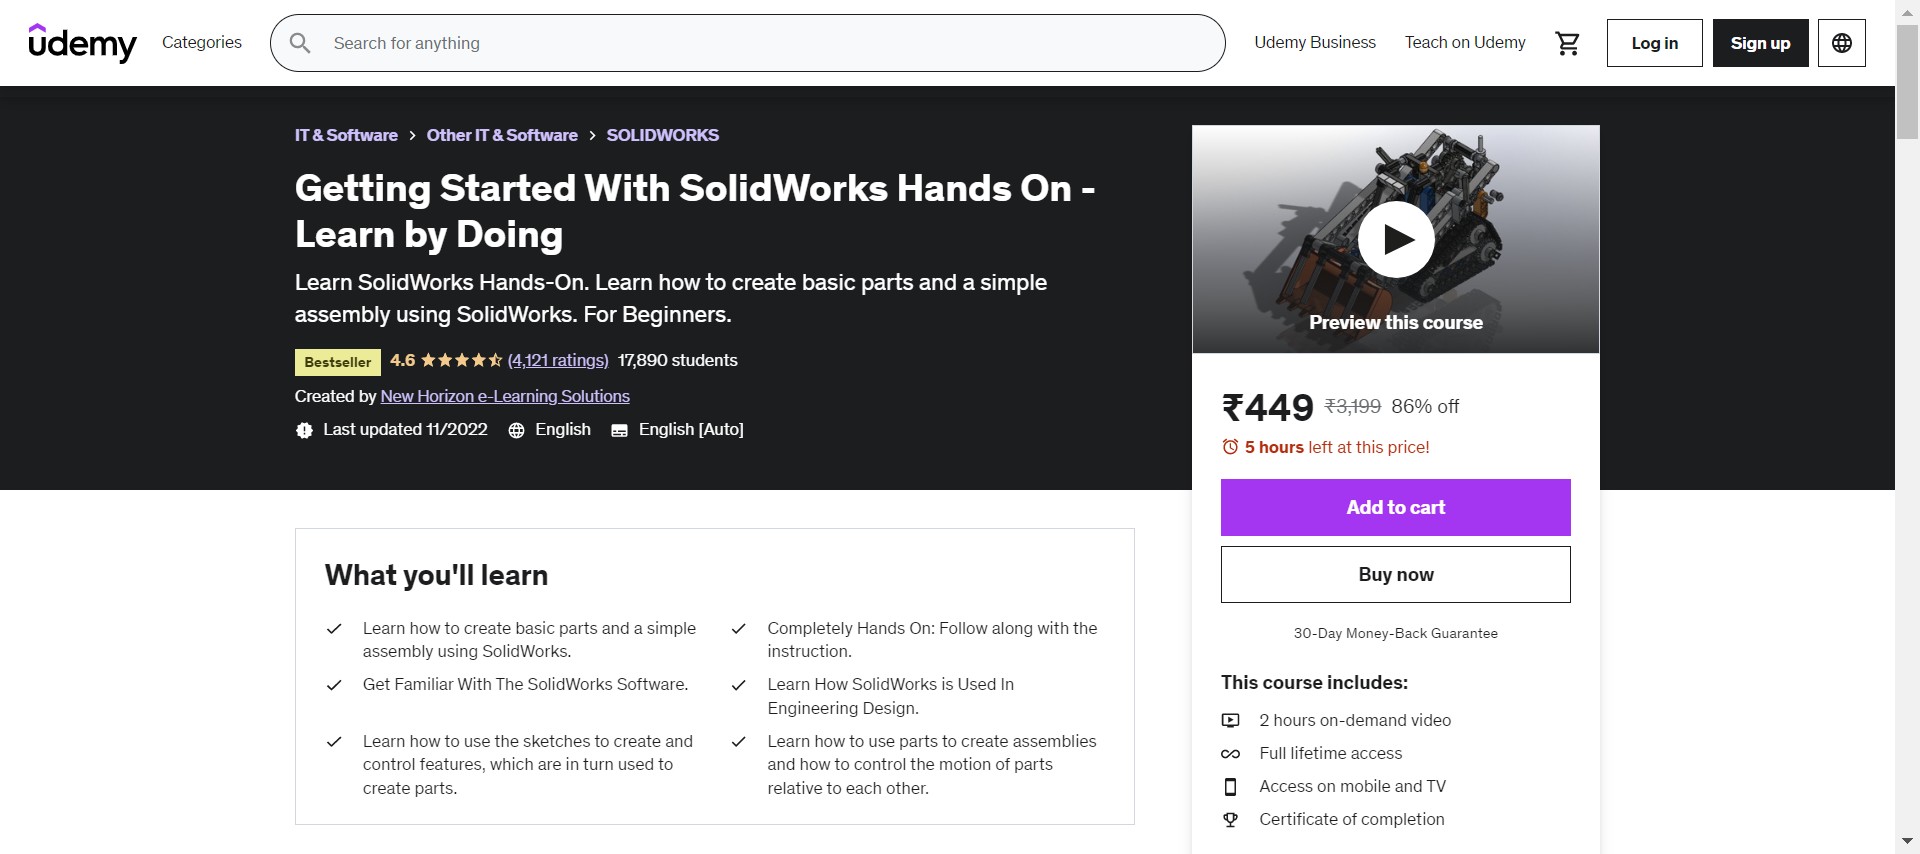 Getting Started with Solidworks Hands-On Learn by Doing